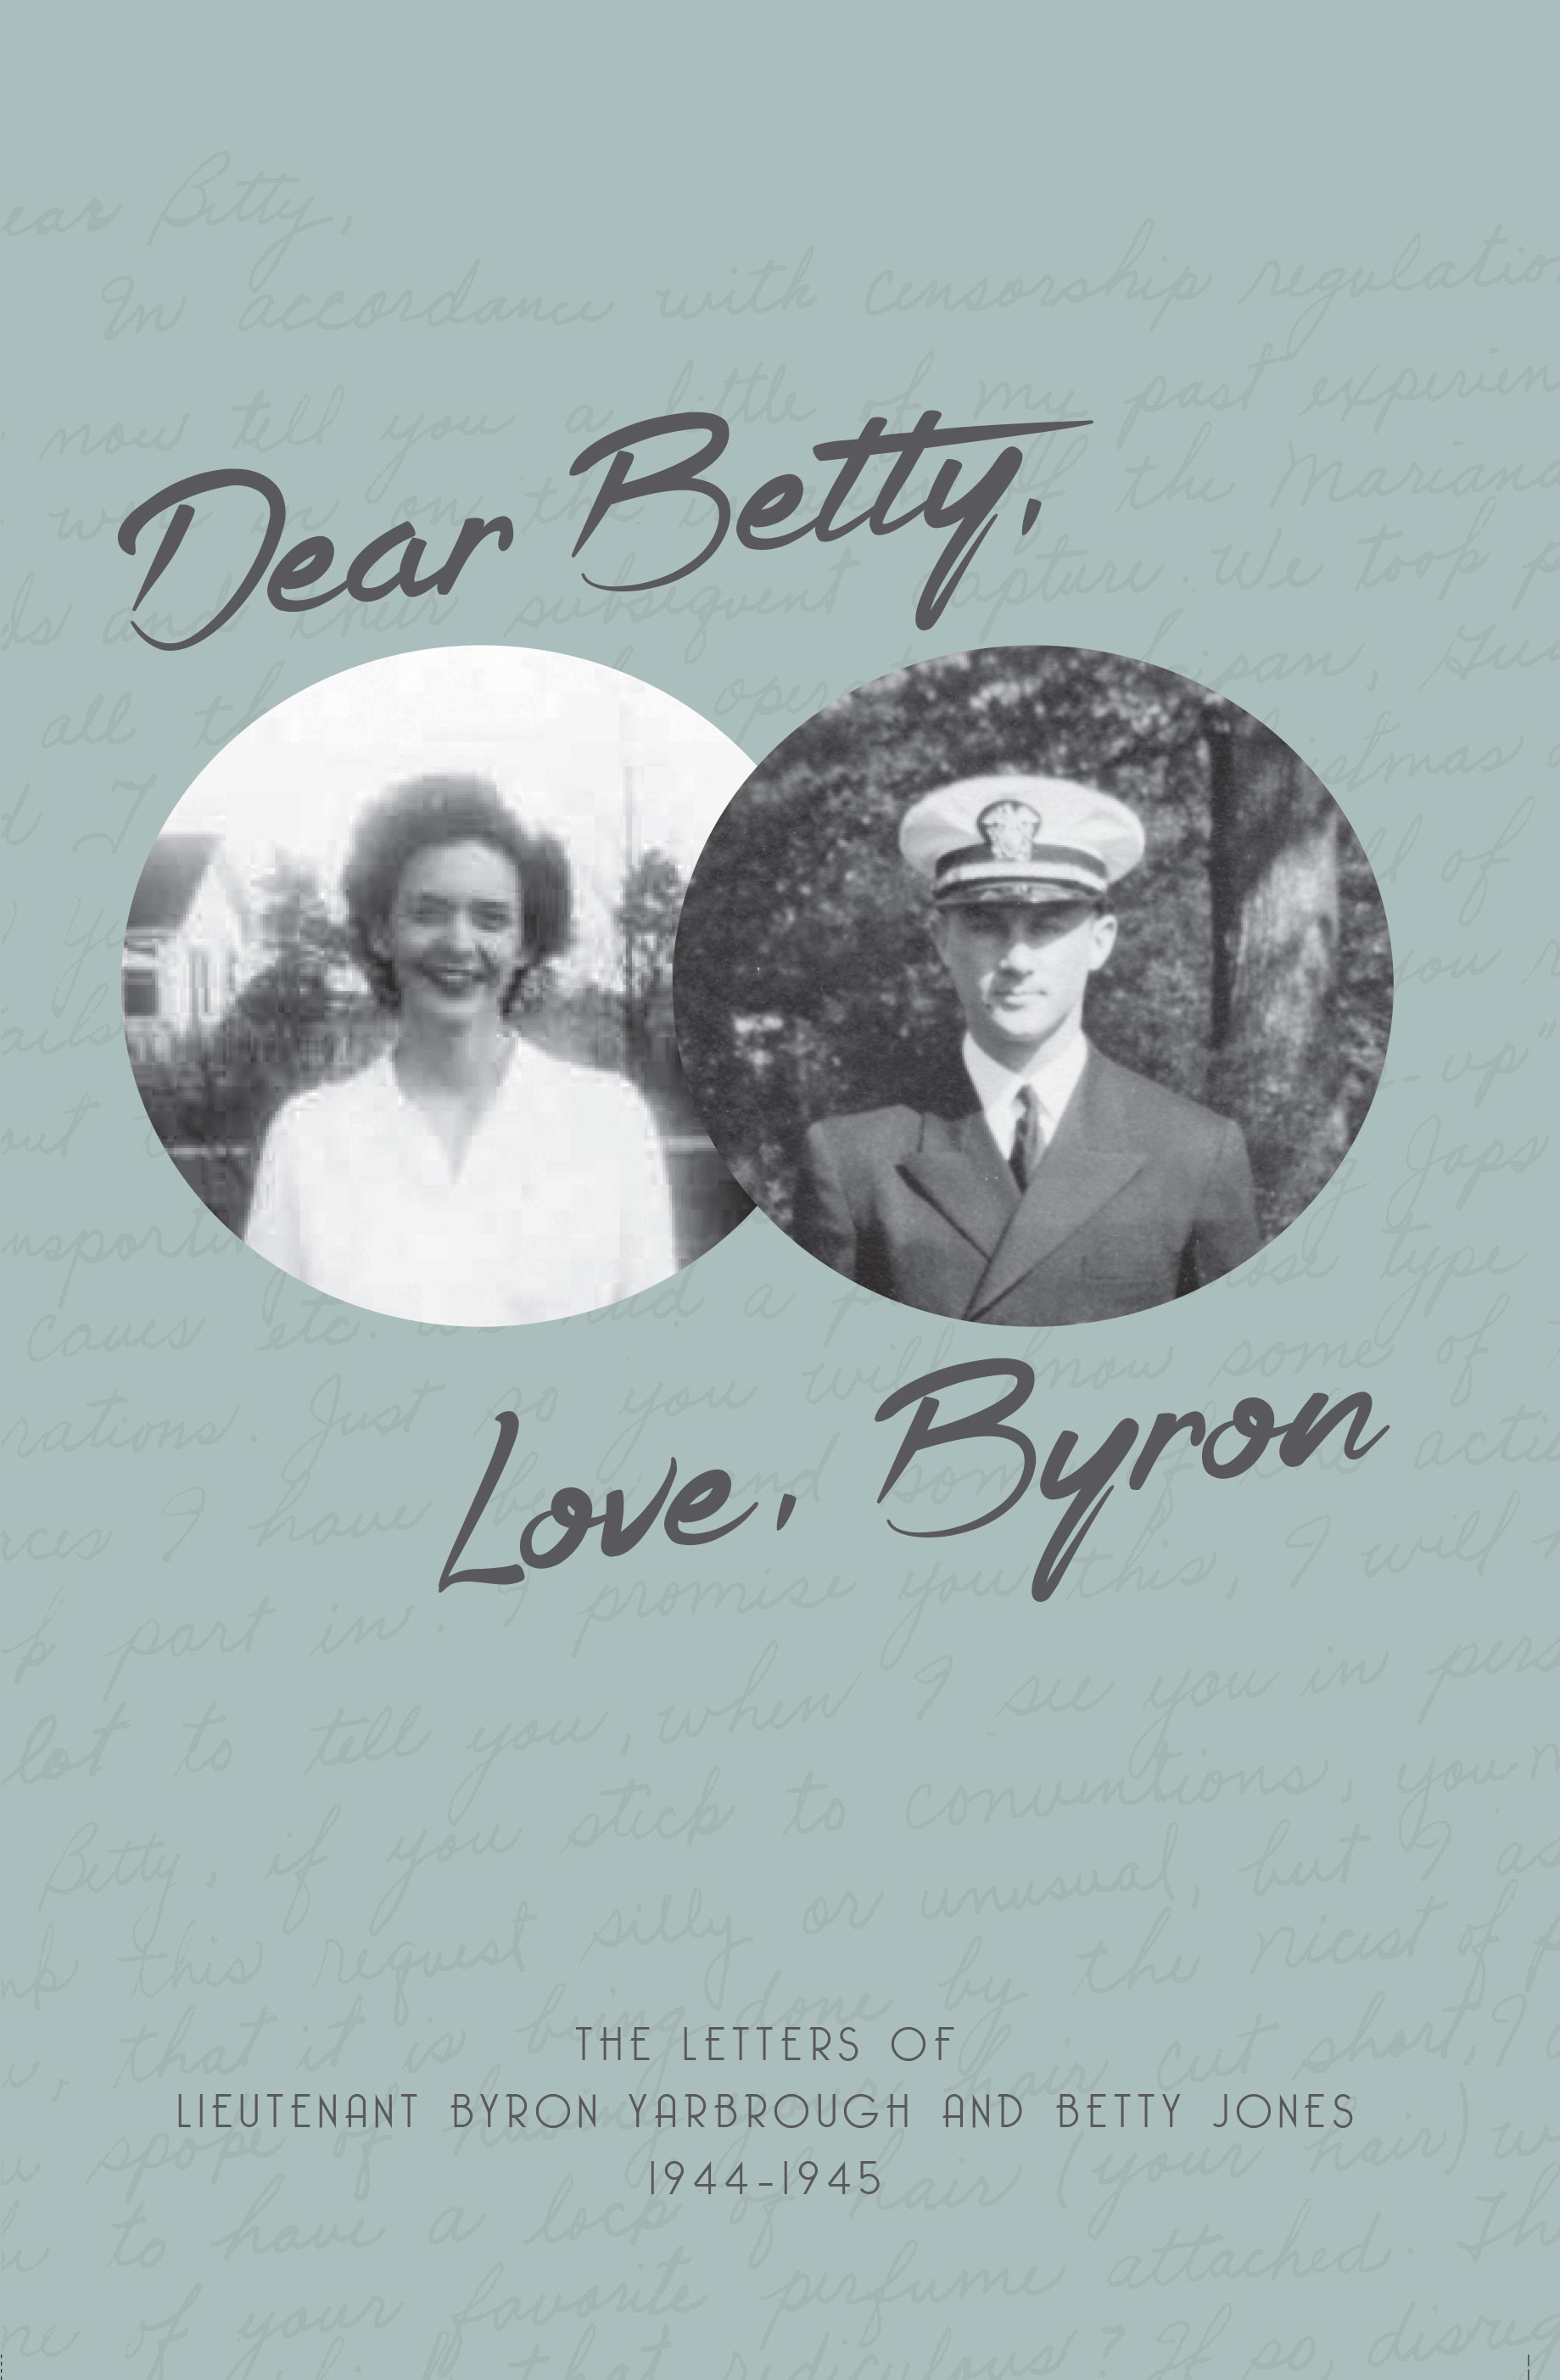 Book titled Dear Betty, Love, Byron: The Letters of Lieutenant Byron Yarbrough and Betty Jones 1944 to 45